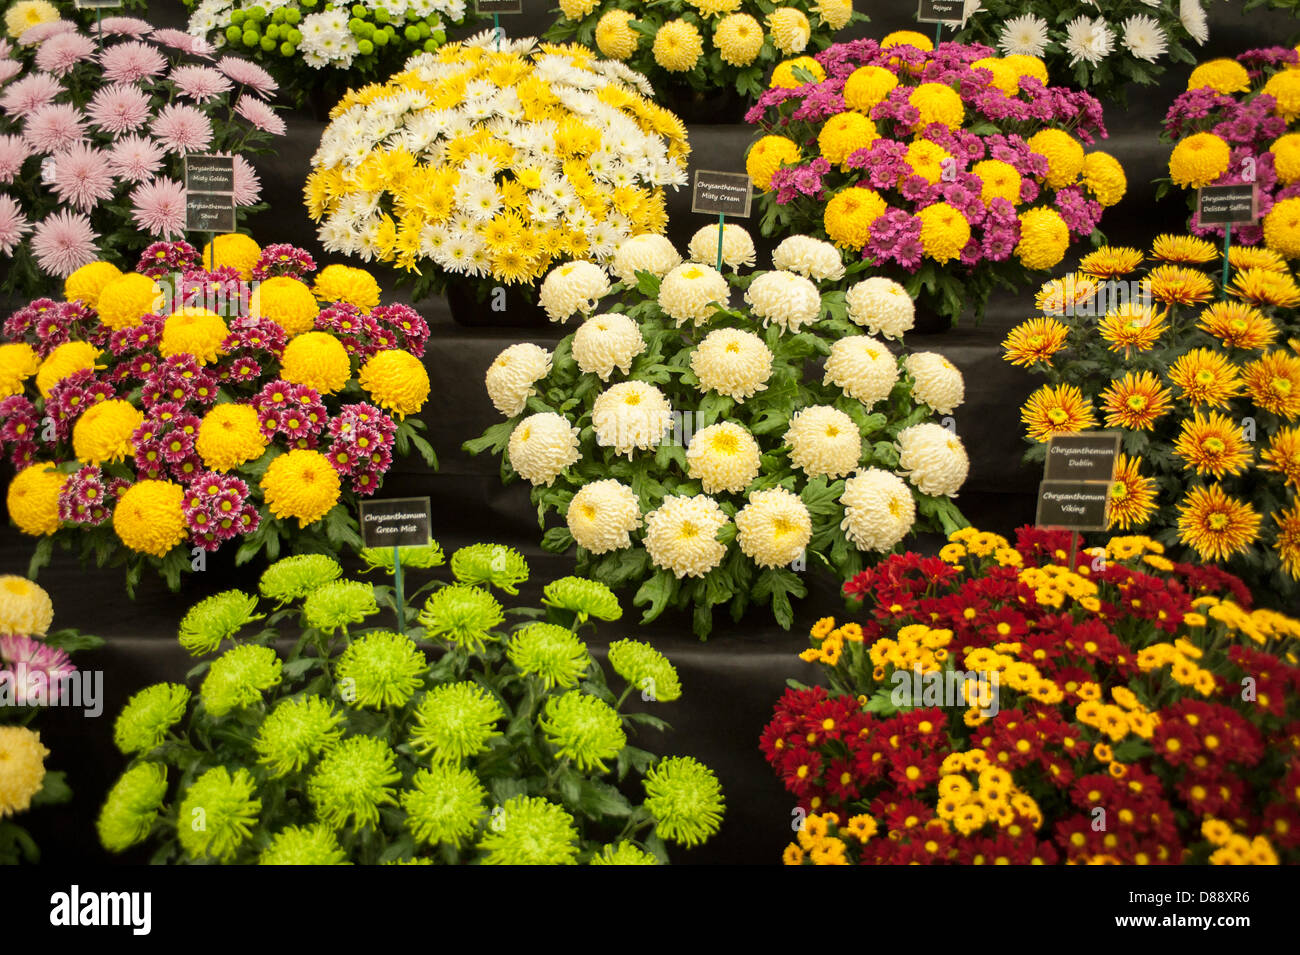 London, UK. 20th May 2013. Chrysanthemums on display in the Great Pavilion at the RHS Chelsea Flower Show. Credit:  Malcolm Park / Alamy Live News Stock Photo